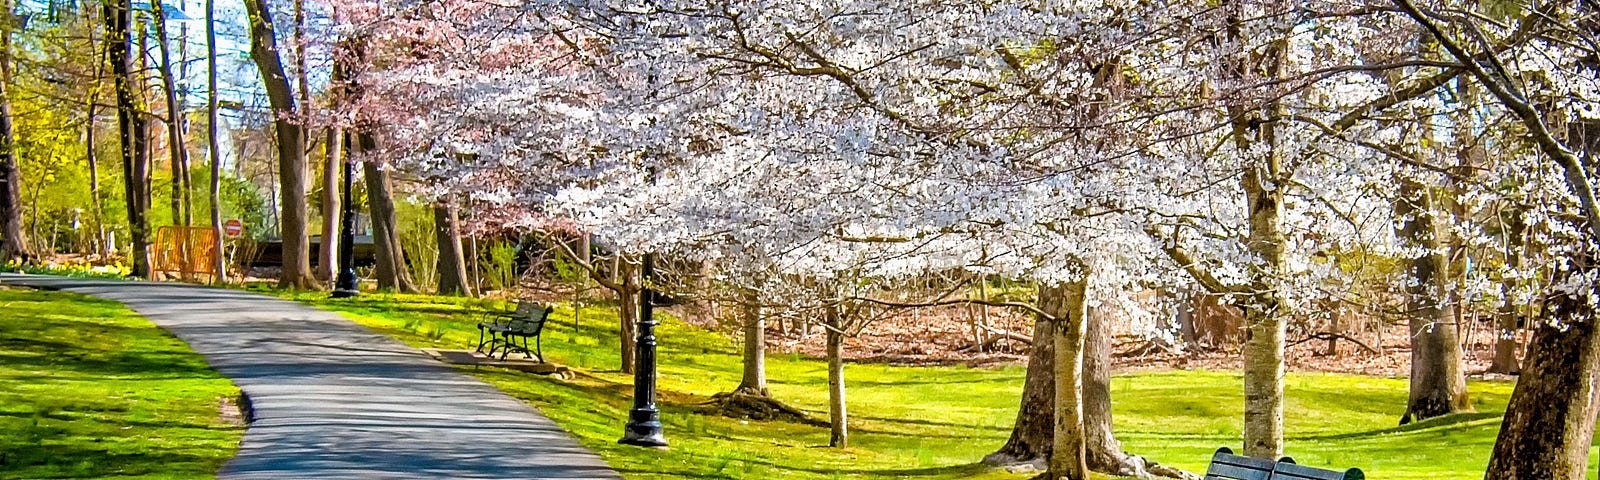 Image of a footpath, grass on both sides, a bench on the grass to the right and trees with blossoms on the right.